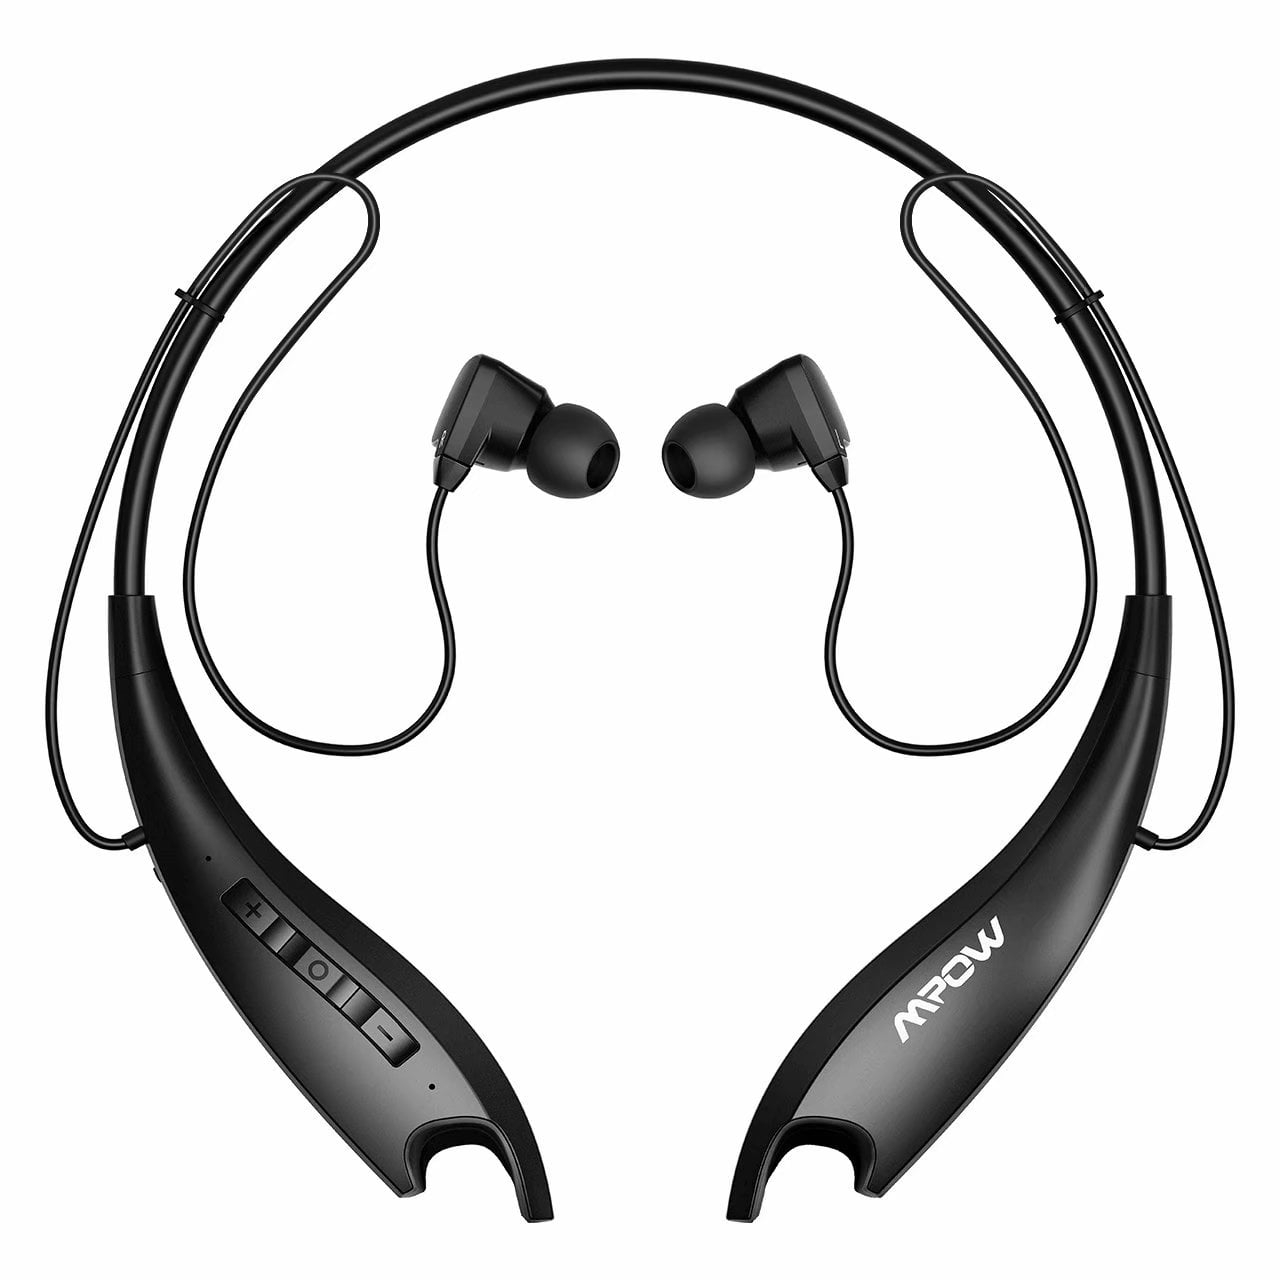 Mpow Jaws Gen-5 Bluetooth Headphones 18 Hrs Playtime, V5.0 Bluetooth Neckband Headset w/Call Vibrate & CVC 6.0 Noise Cancelling Mic, Wireless Headphones for Cell Phones/Tablets/Computers Black